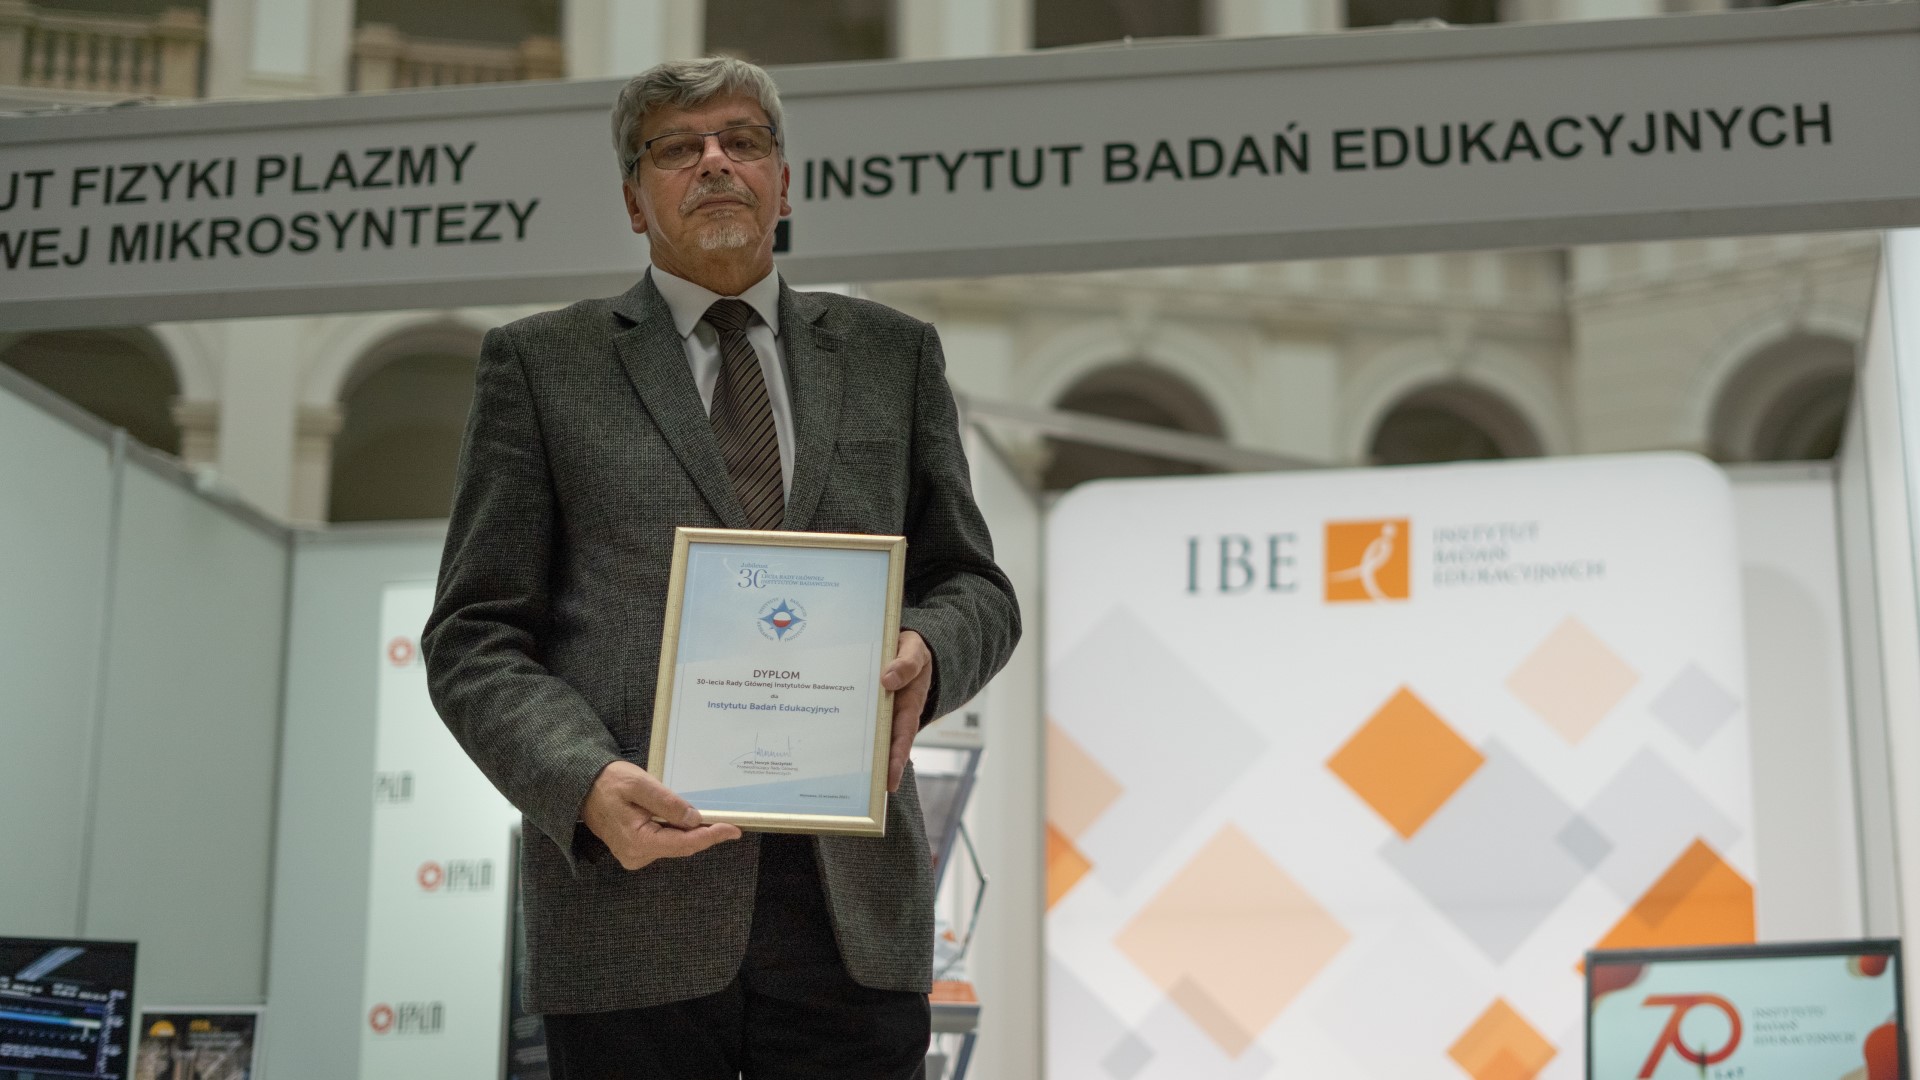 Assoc. Prof. Robert T. Ptaszek awarded a diploma from the Main Council of Research Institutes